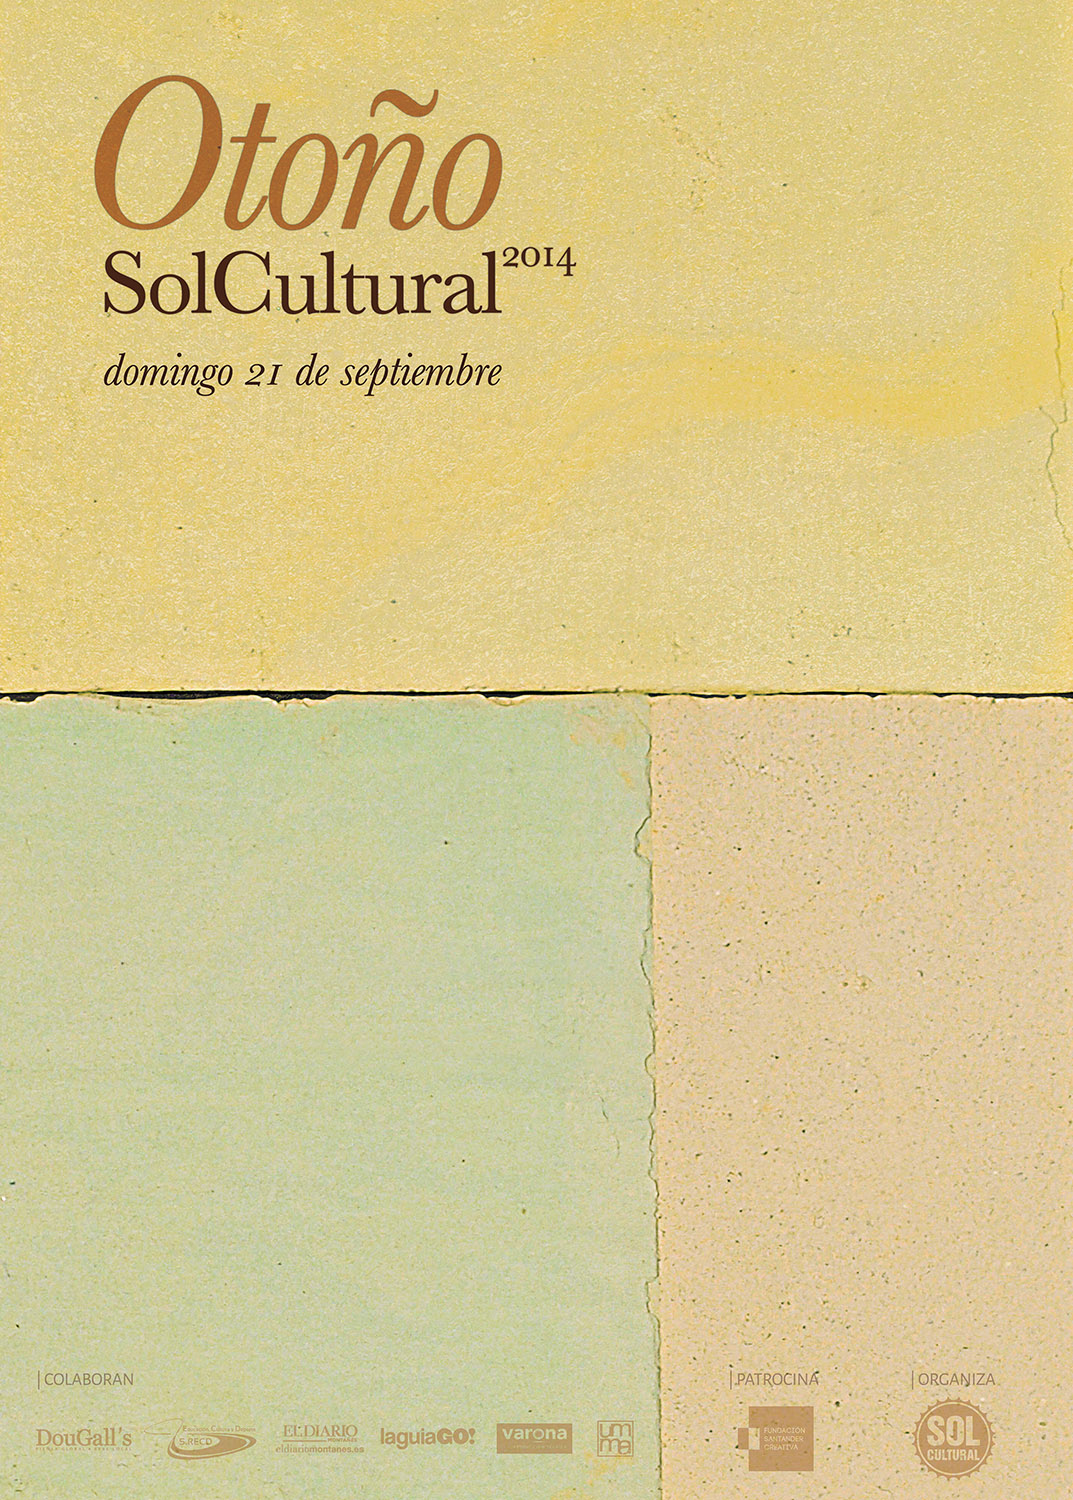 2014 - otoño Solcultural - Beusual